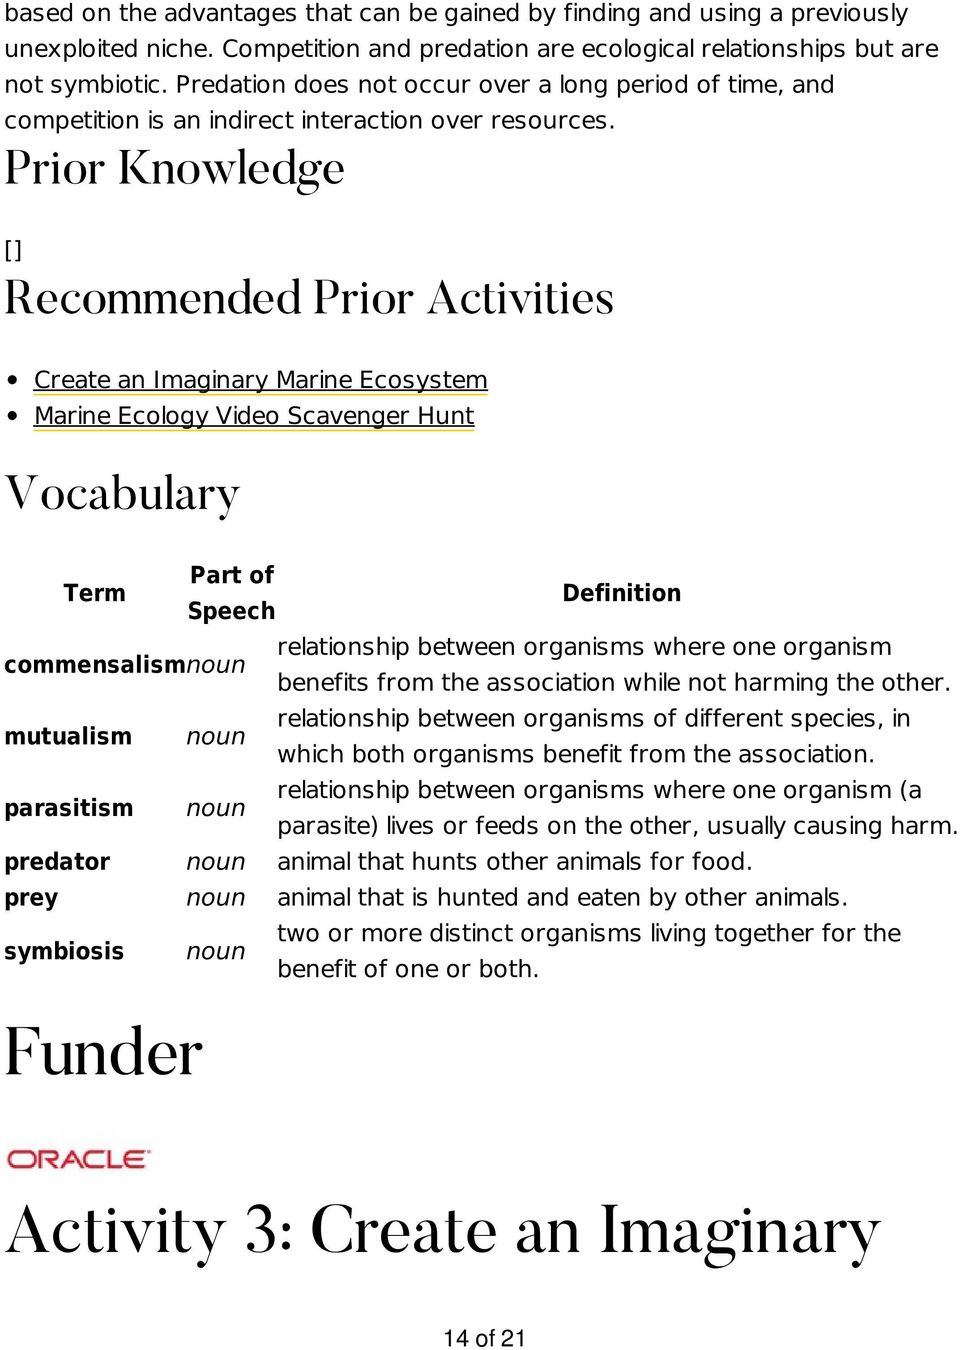 Prior Knowledge [] Recommended Prior Activities Create an Imaginary Marine Ecosystem Marine Ecology Video Scavenger Hunt Vocabulary Term Part of Speech Definition commensalismnoun relationship